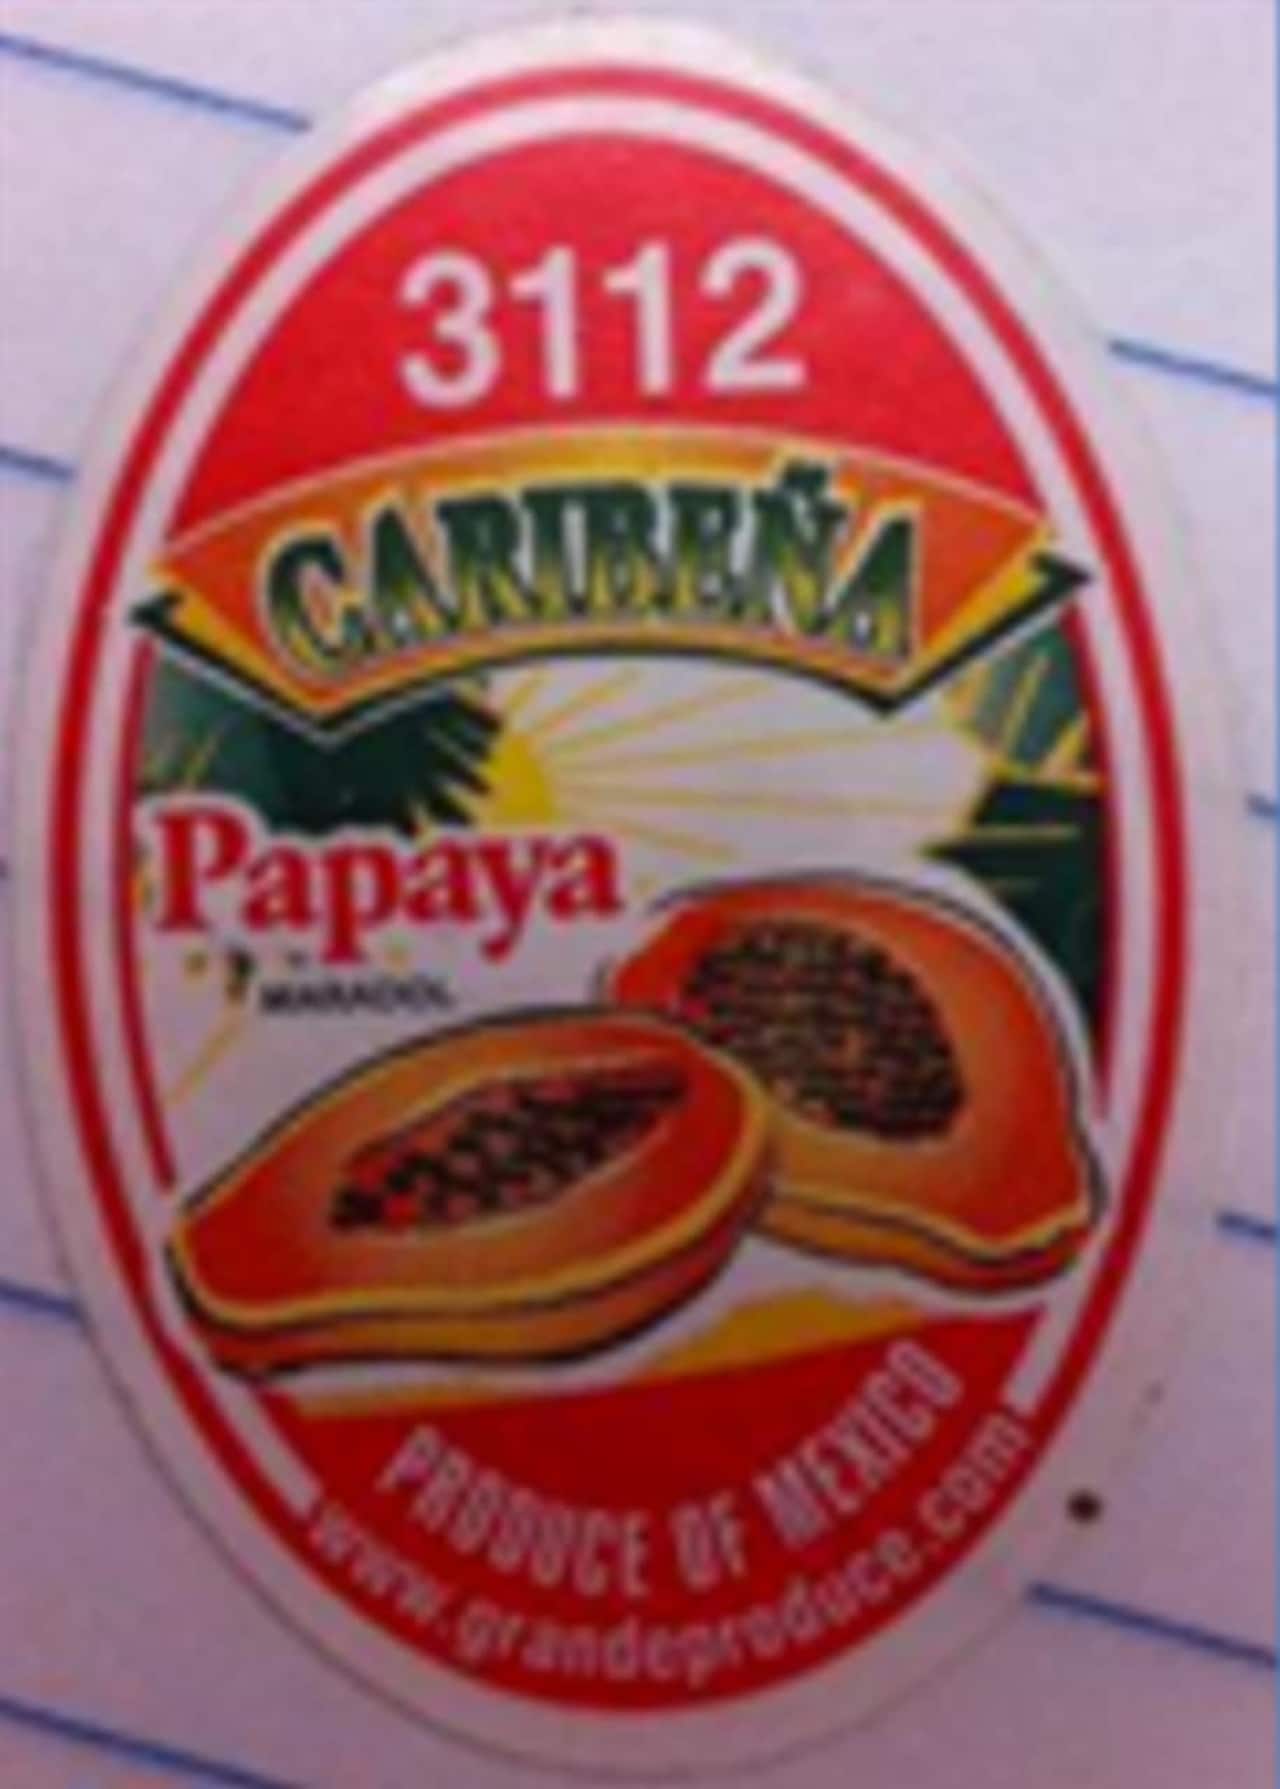 The label on the suspect papayas.